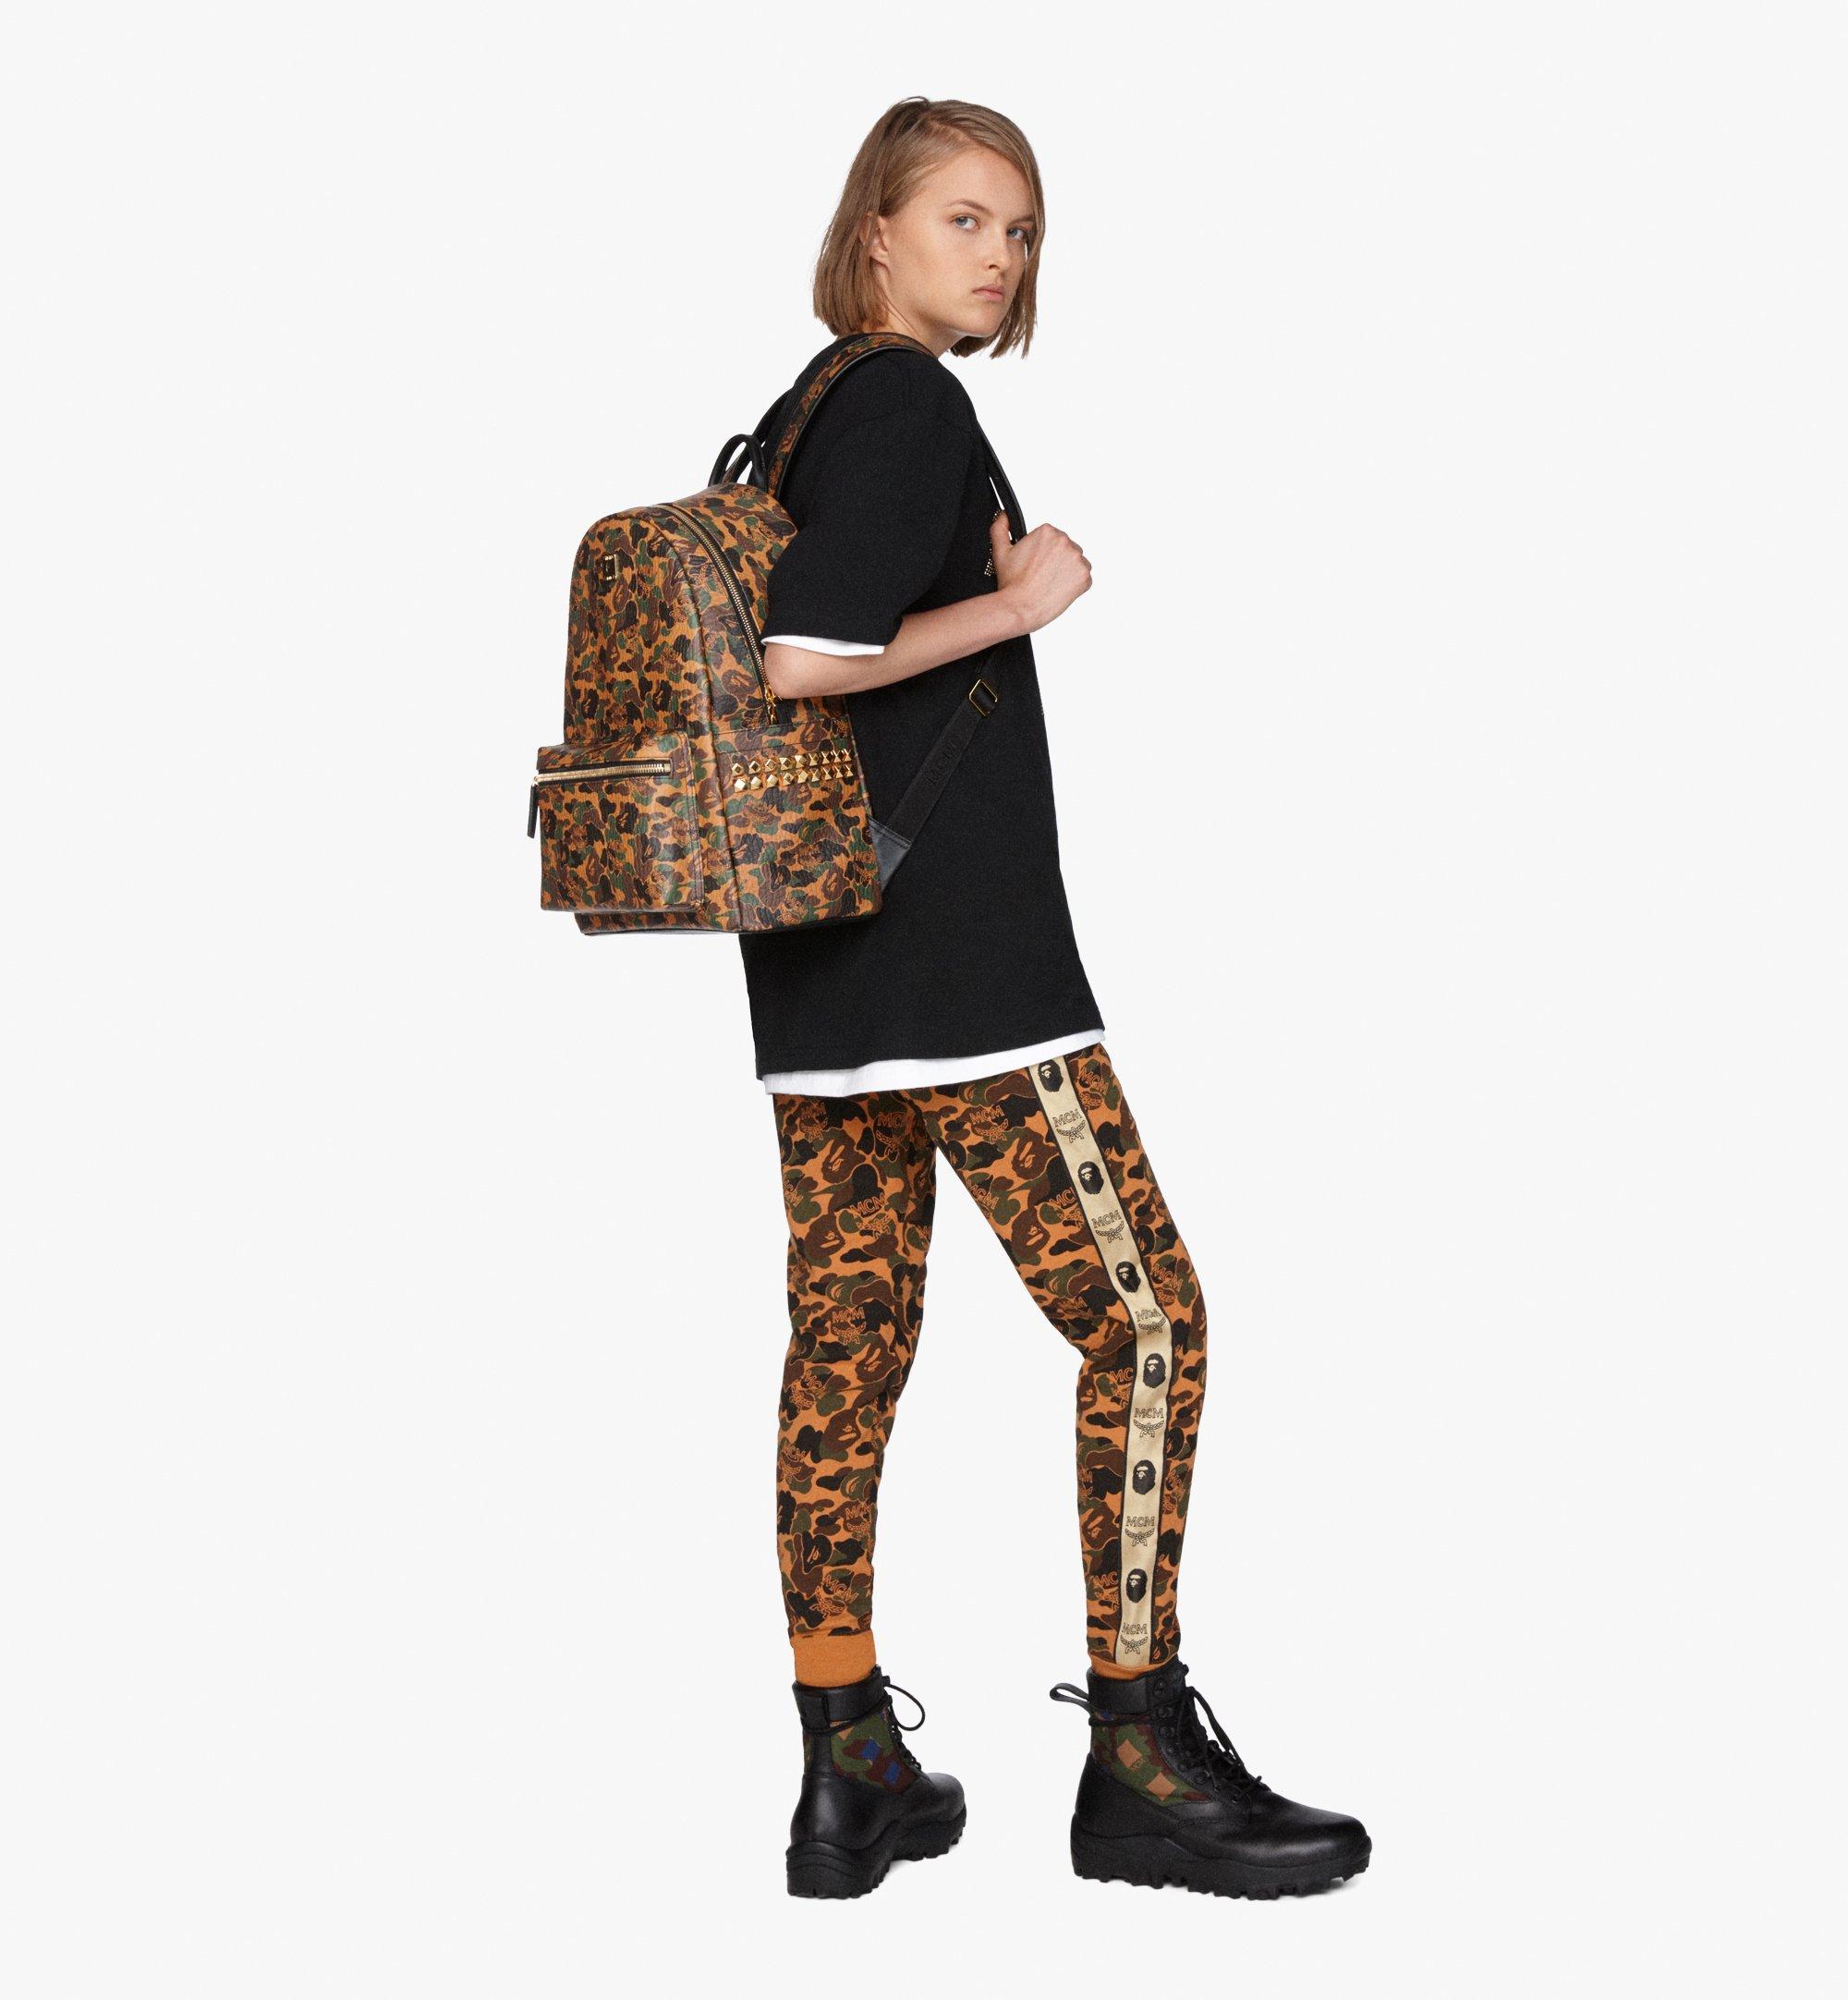 MCM X BAPE Limited Stark Visetos Camouflage Backpack NEW Deadstock w  Dustbag $2,750.00 - PicClick